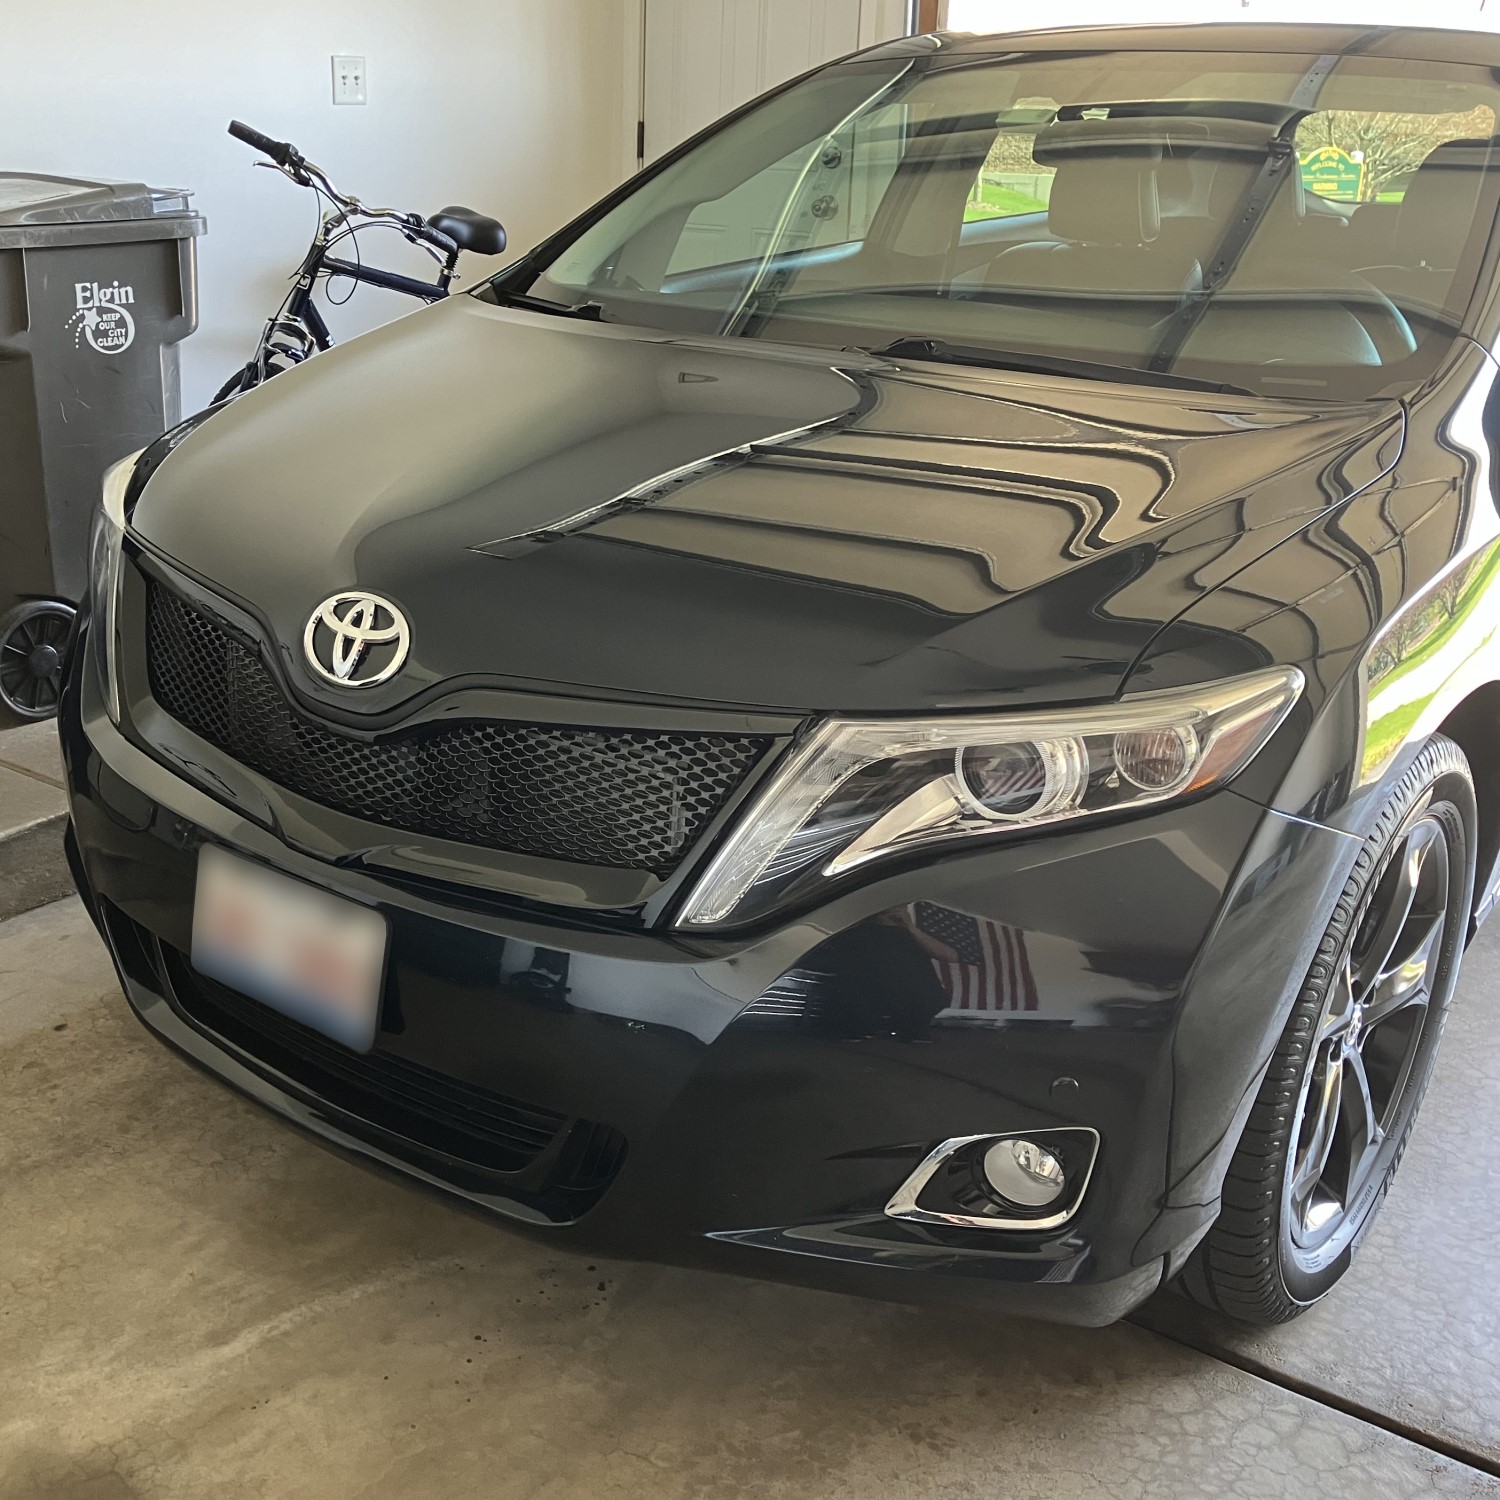 Full Grille Rework for Toyota Venza - Removing the bars and blacking out the grille mesh & frame